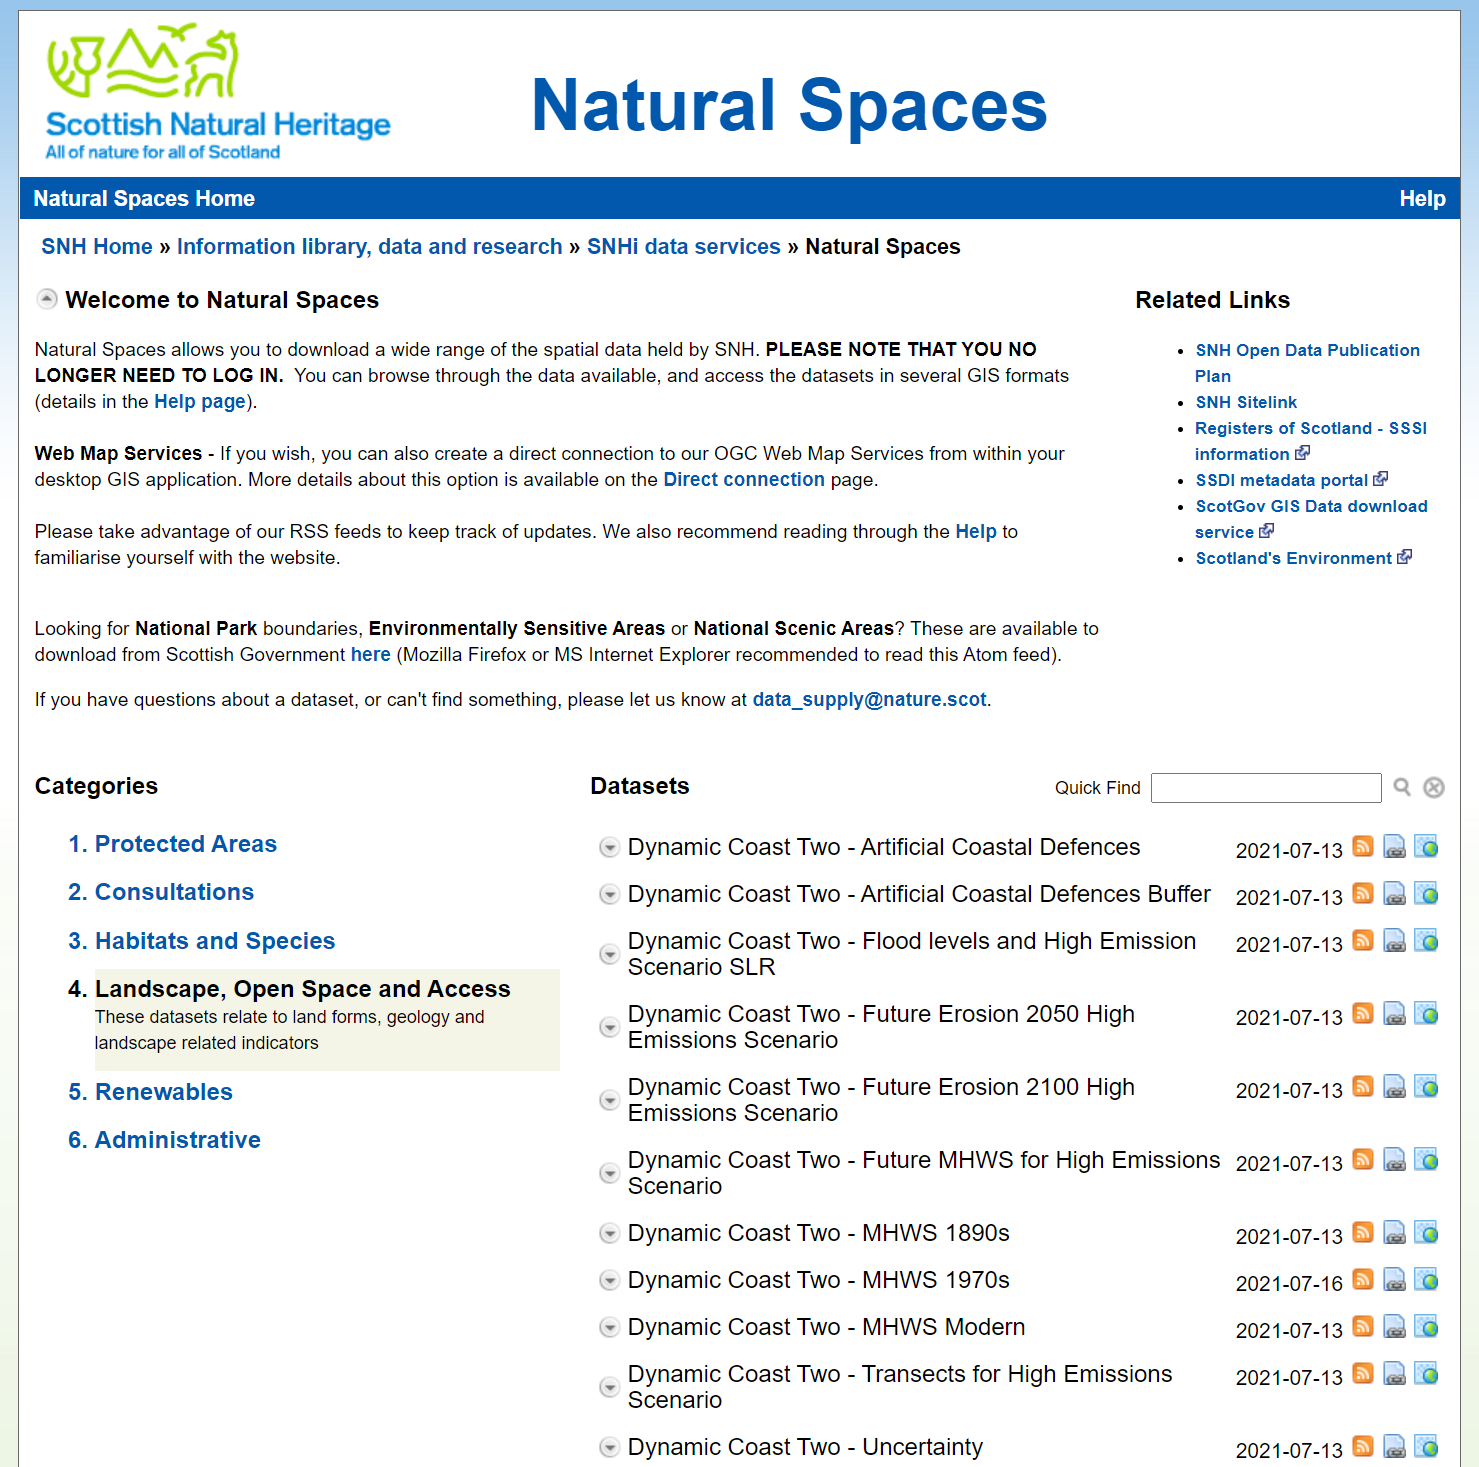 Screenshot of the Natural Spaces webpage